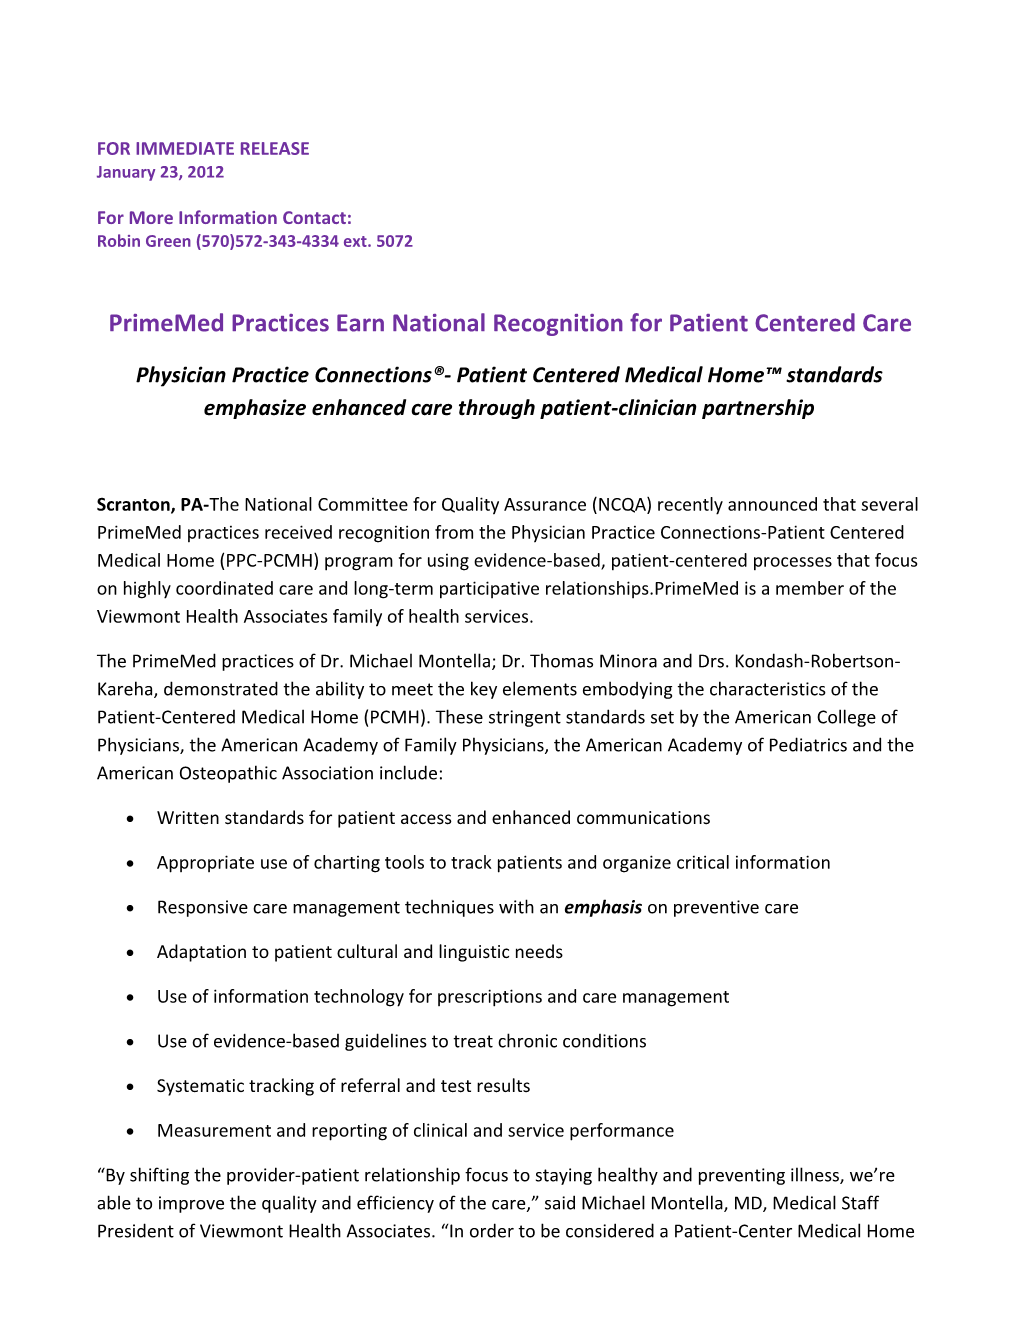 Primemed Practices Earn National Recognition for Patient Centered Care